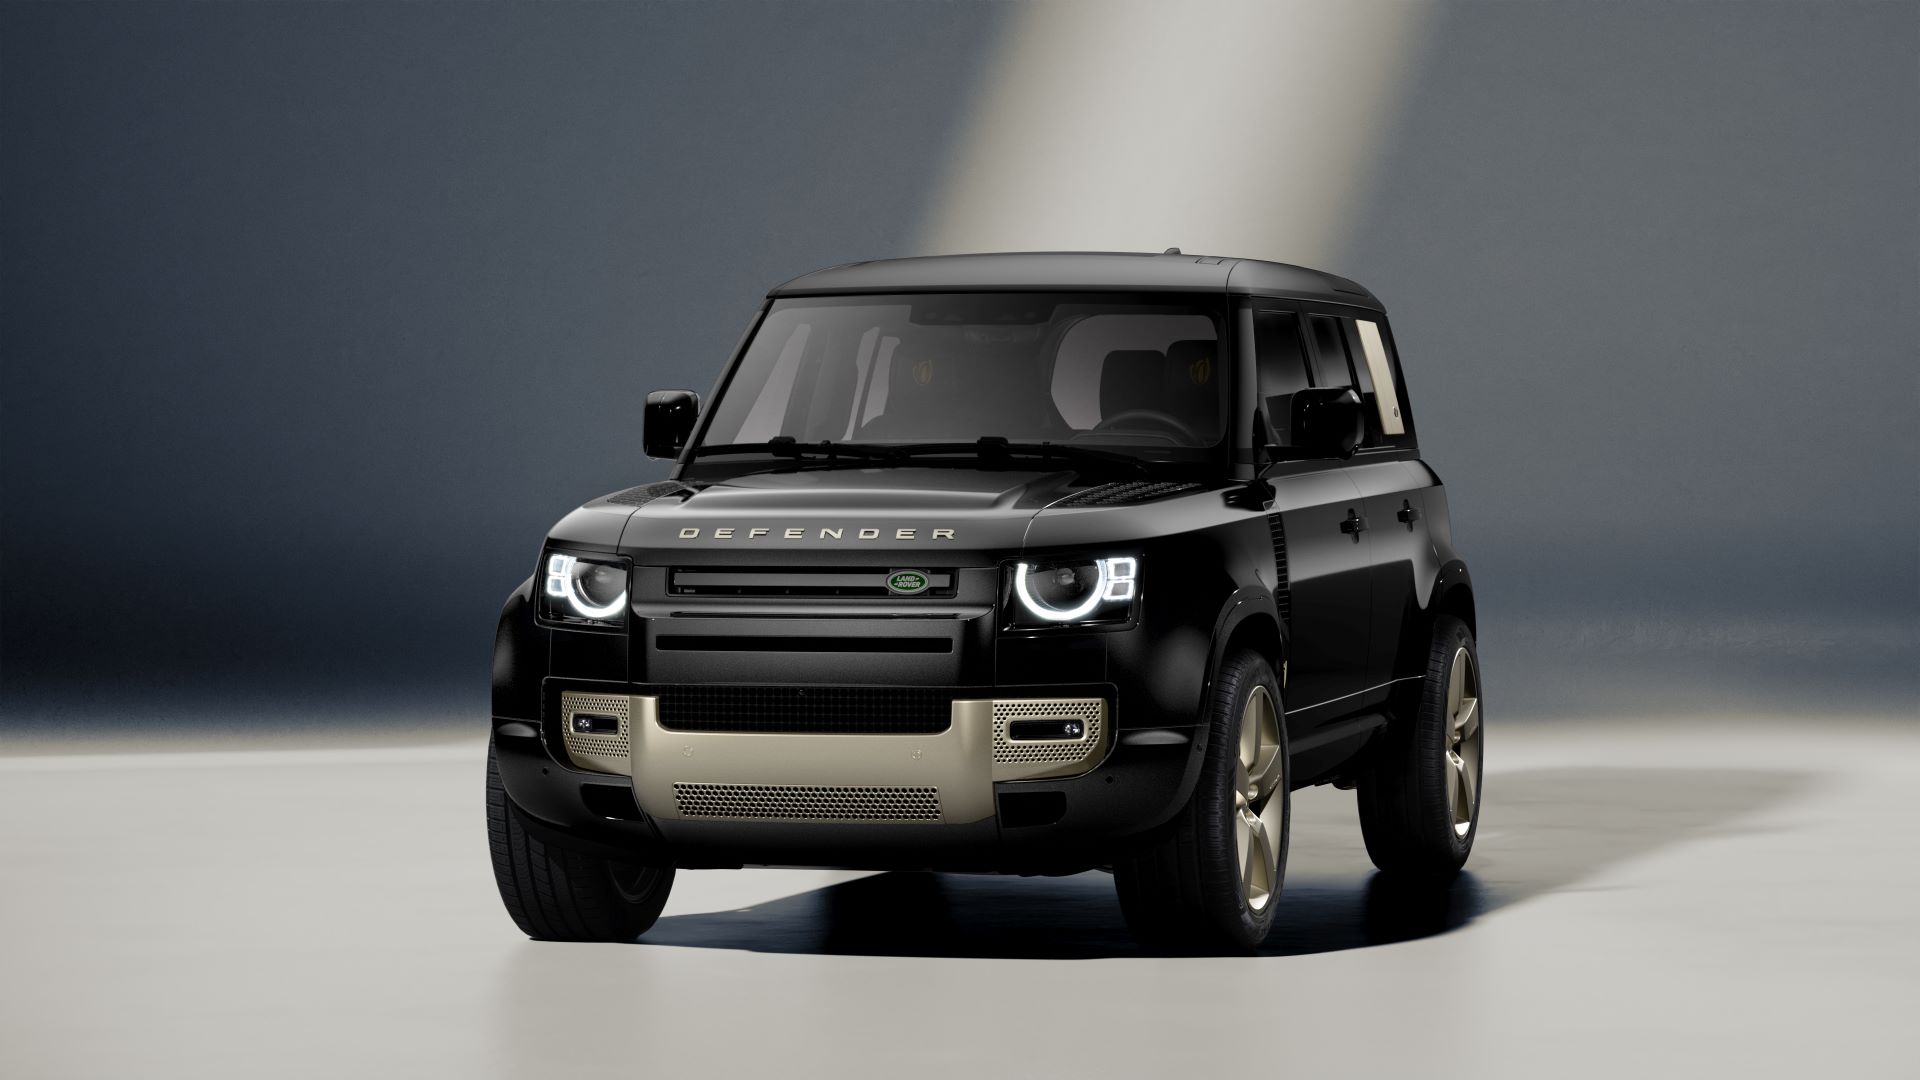 Defender Limited edition model celebrates partnership with Rugby World Cup France 2023